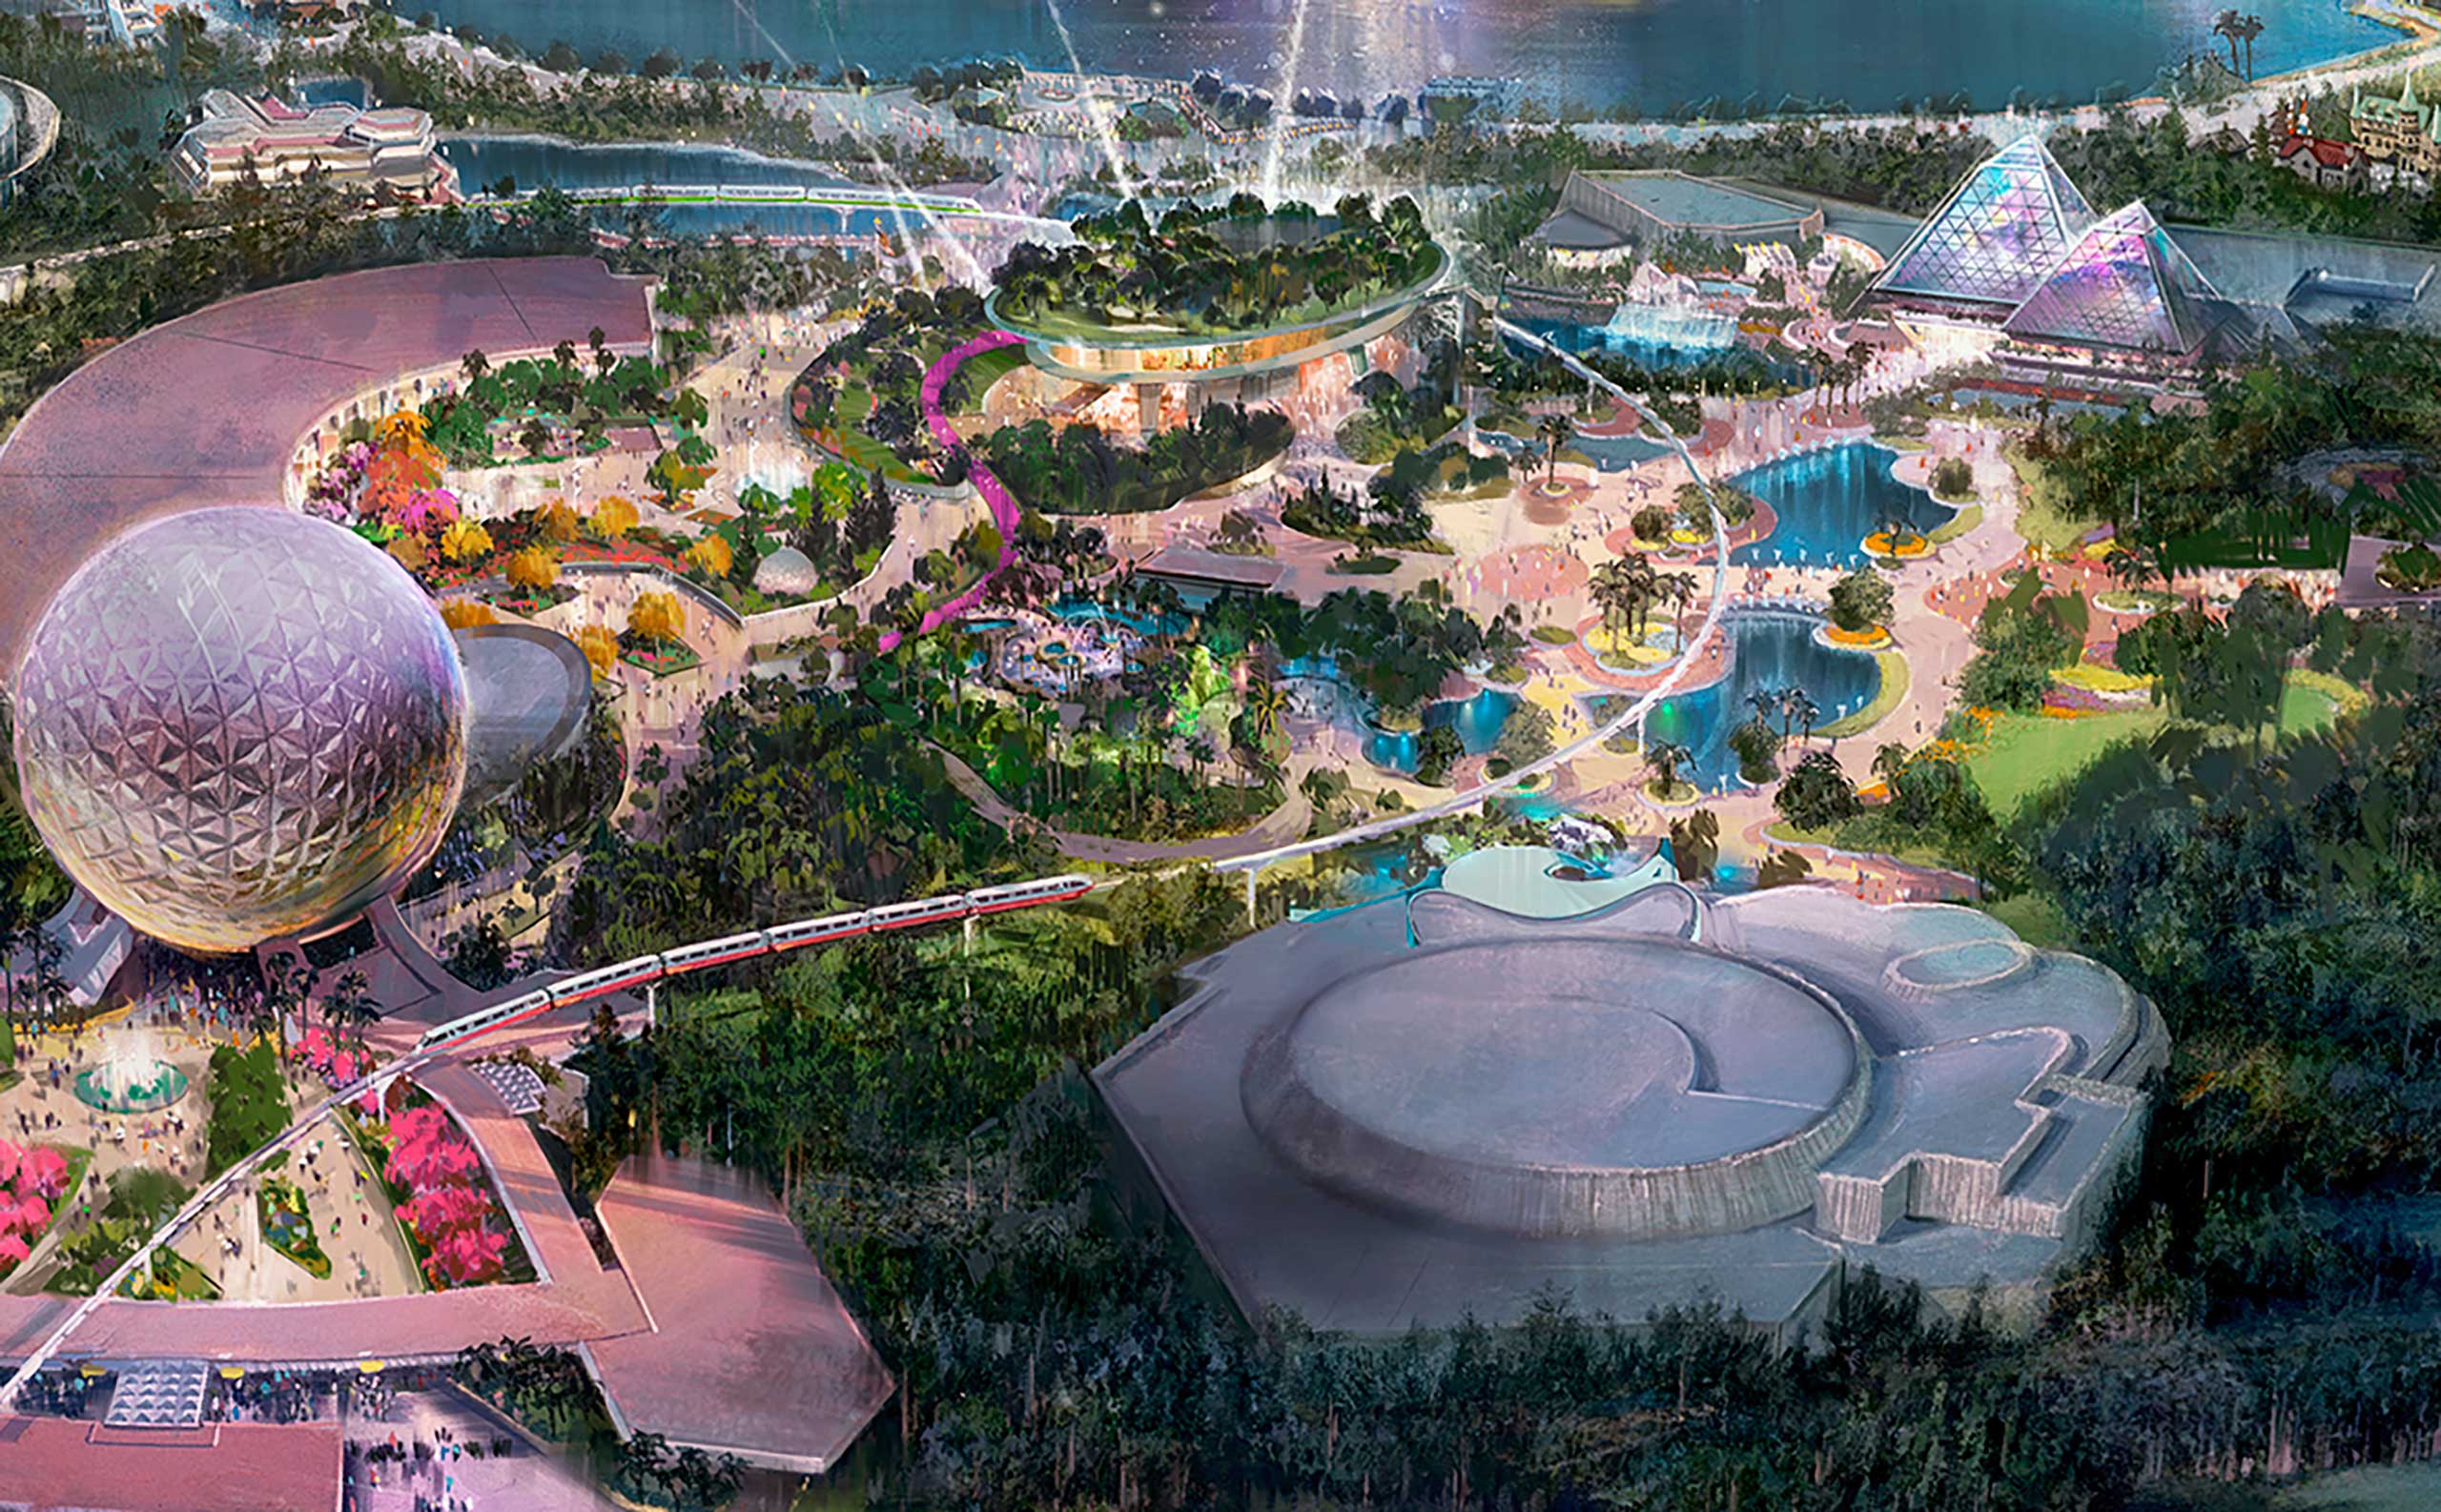 The Journey of Water will be built on some of the land currently occupied by Innoventions West